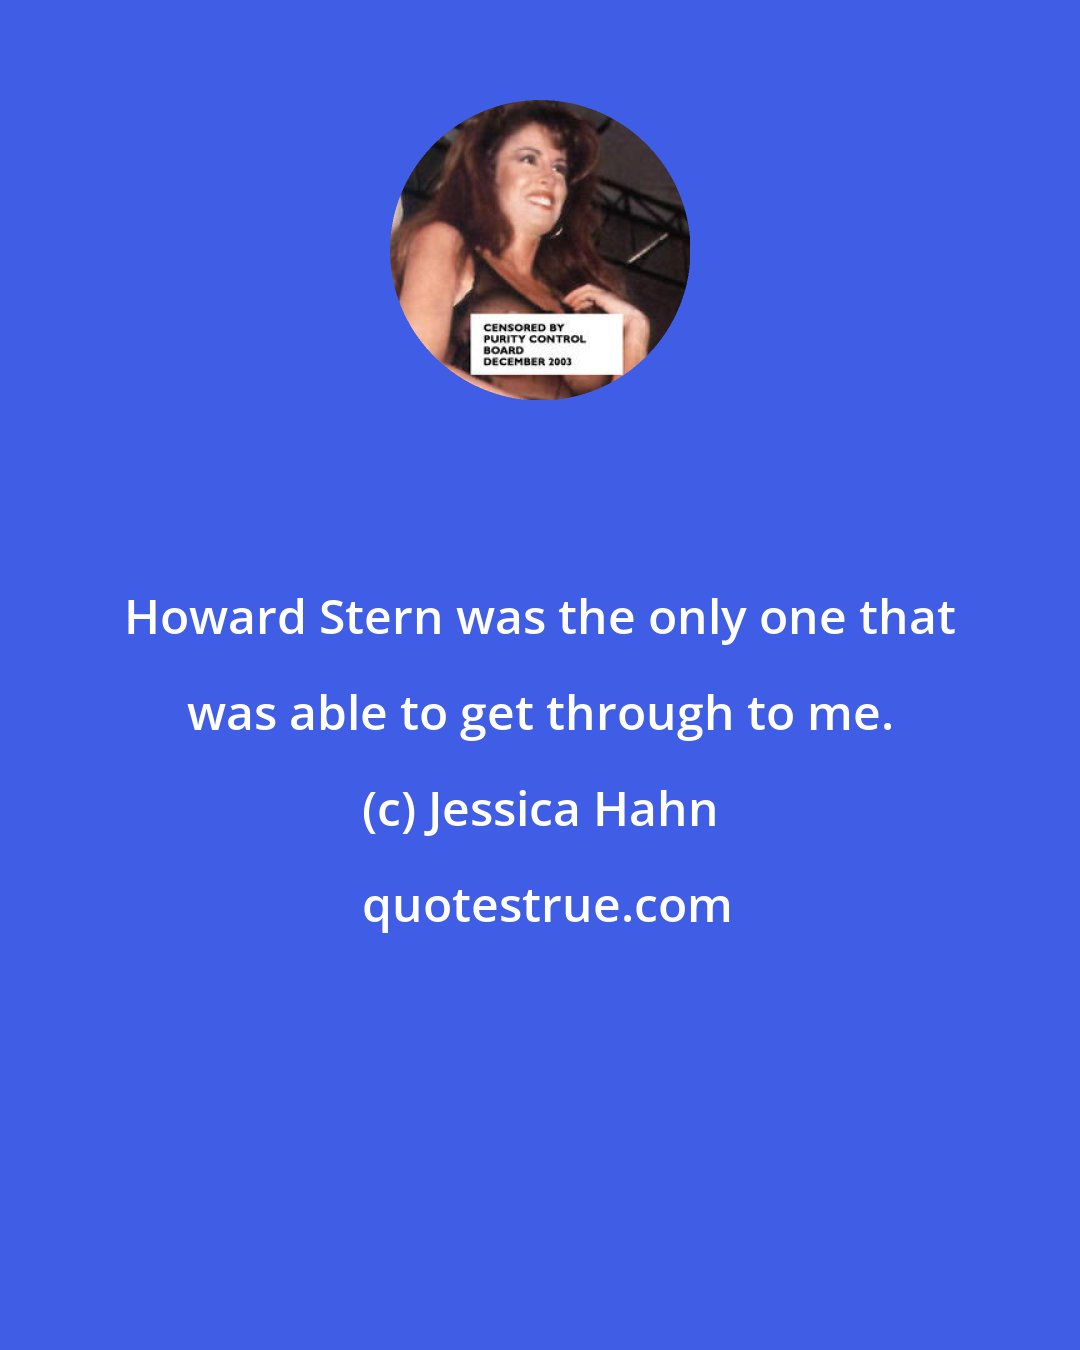 Jessica Hahn: Howard Stern was the only one that was able to get through to me.